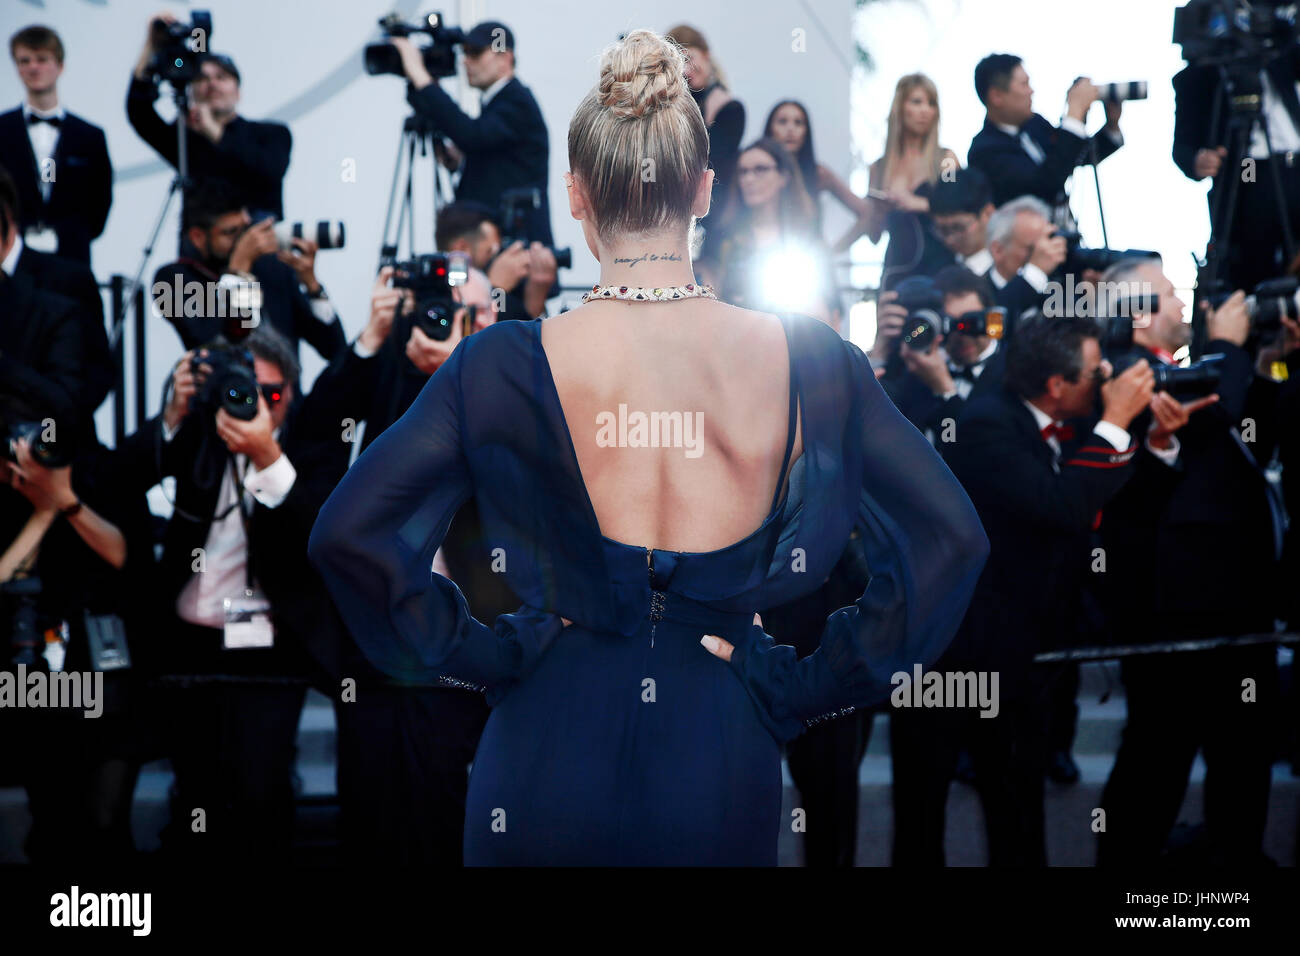 CANNES, FRANCE - MAY 22: Jasmine Sanders attends the 'The Killing Of A Sacred Deer' premiere during the 70th Cannes Film Festival on May 22, 2017 in C Stock Photo